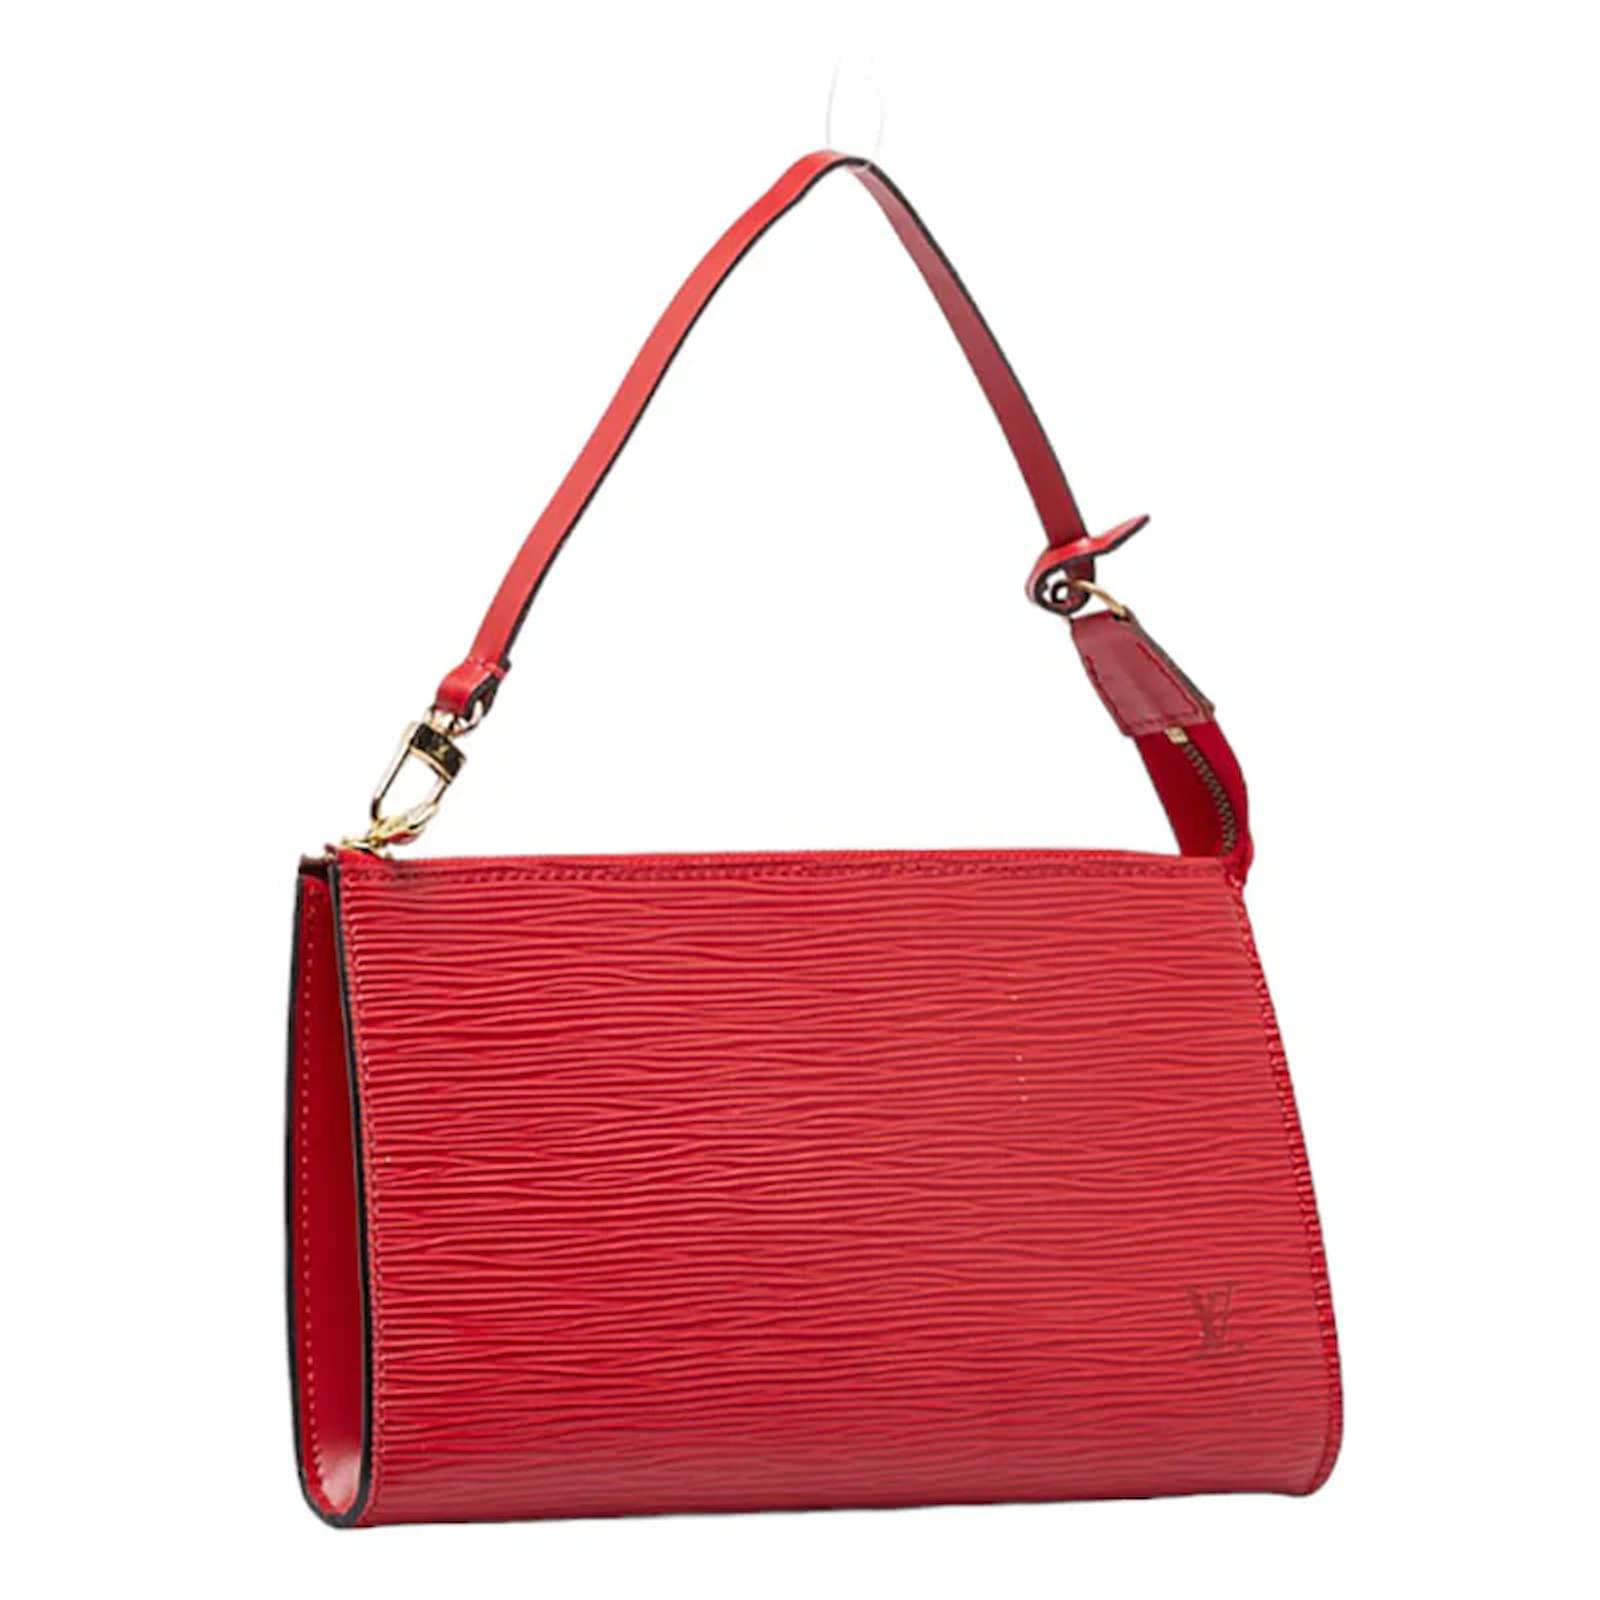 Louis Vuitton Epi Noe Tricolor M44084 Red Leather Pony-style